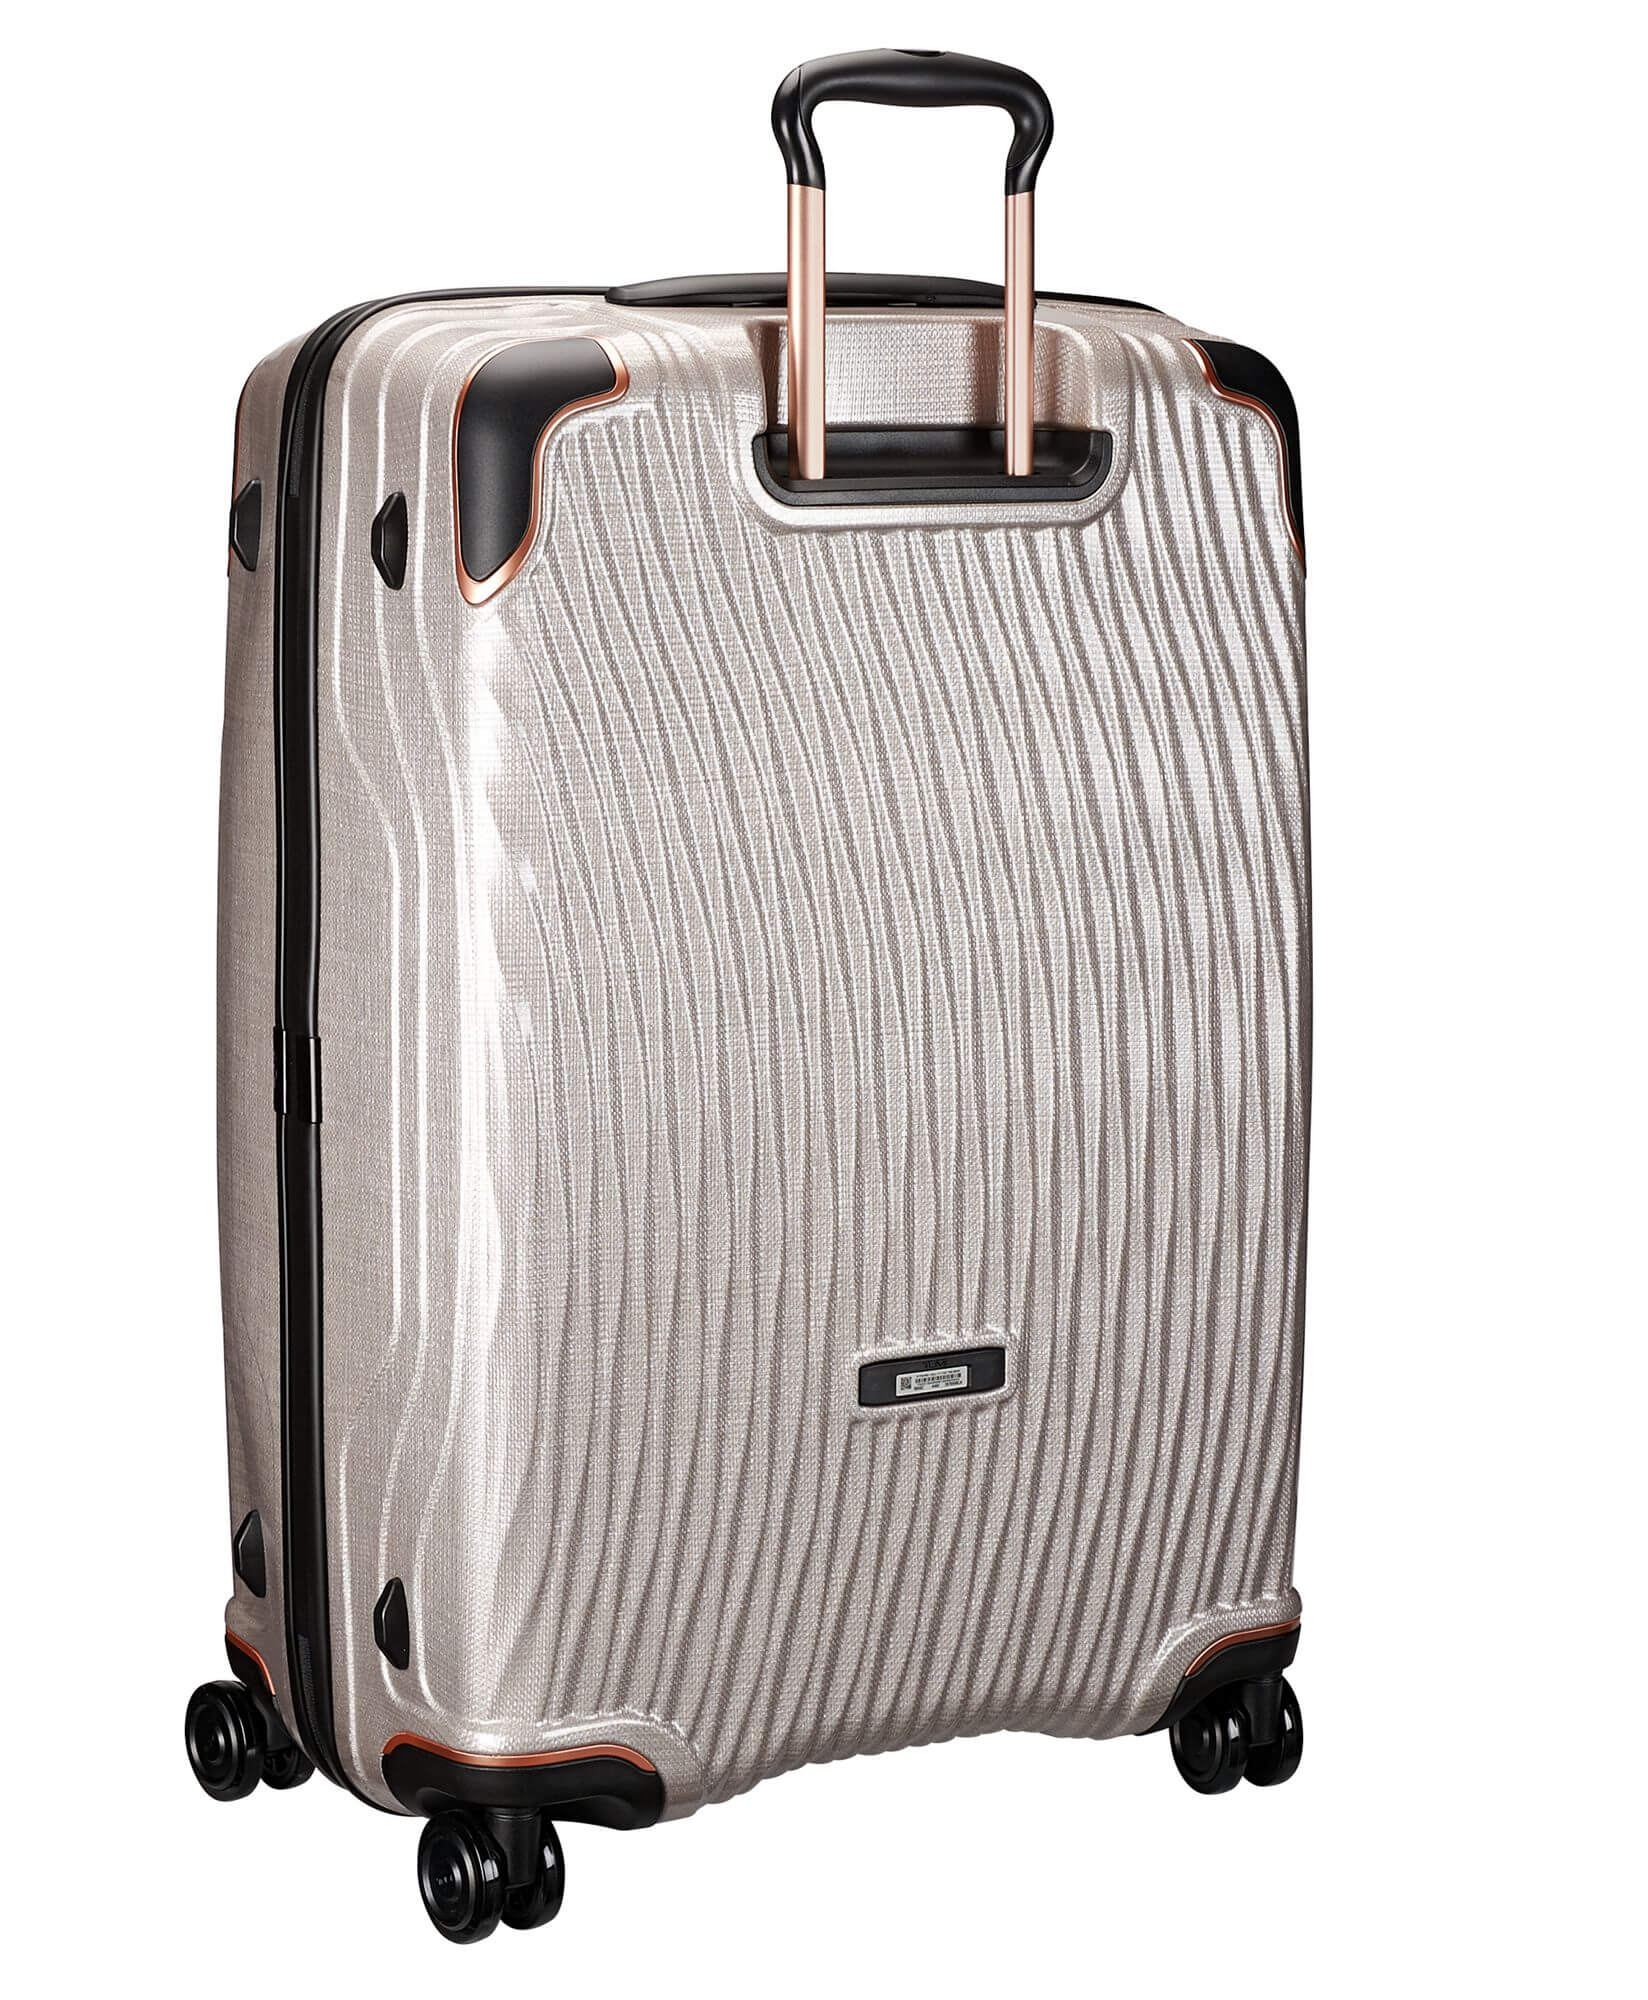 tumi extended trip packing case aluminum suitcase black hardware with handle and wheels